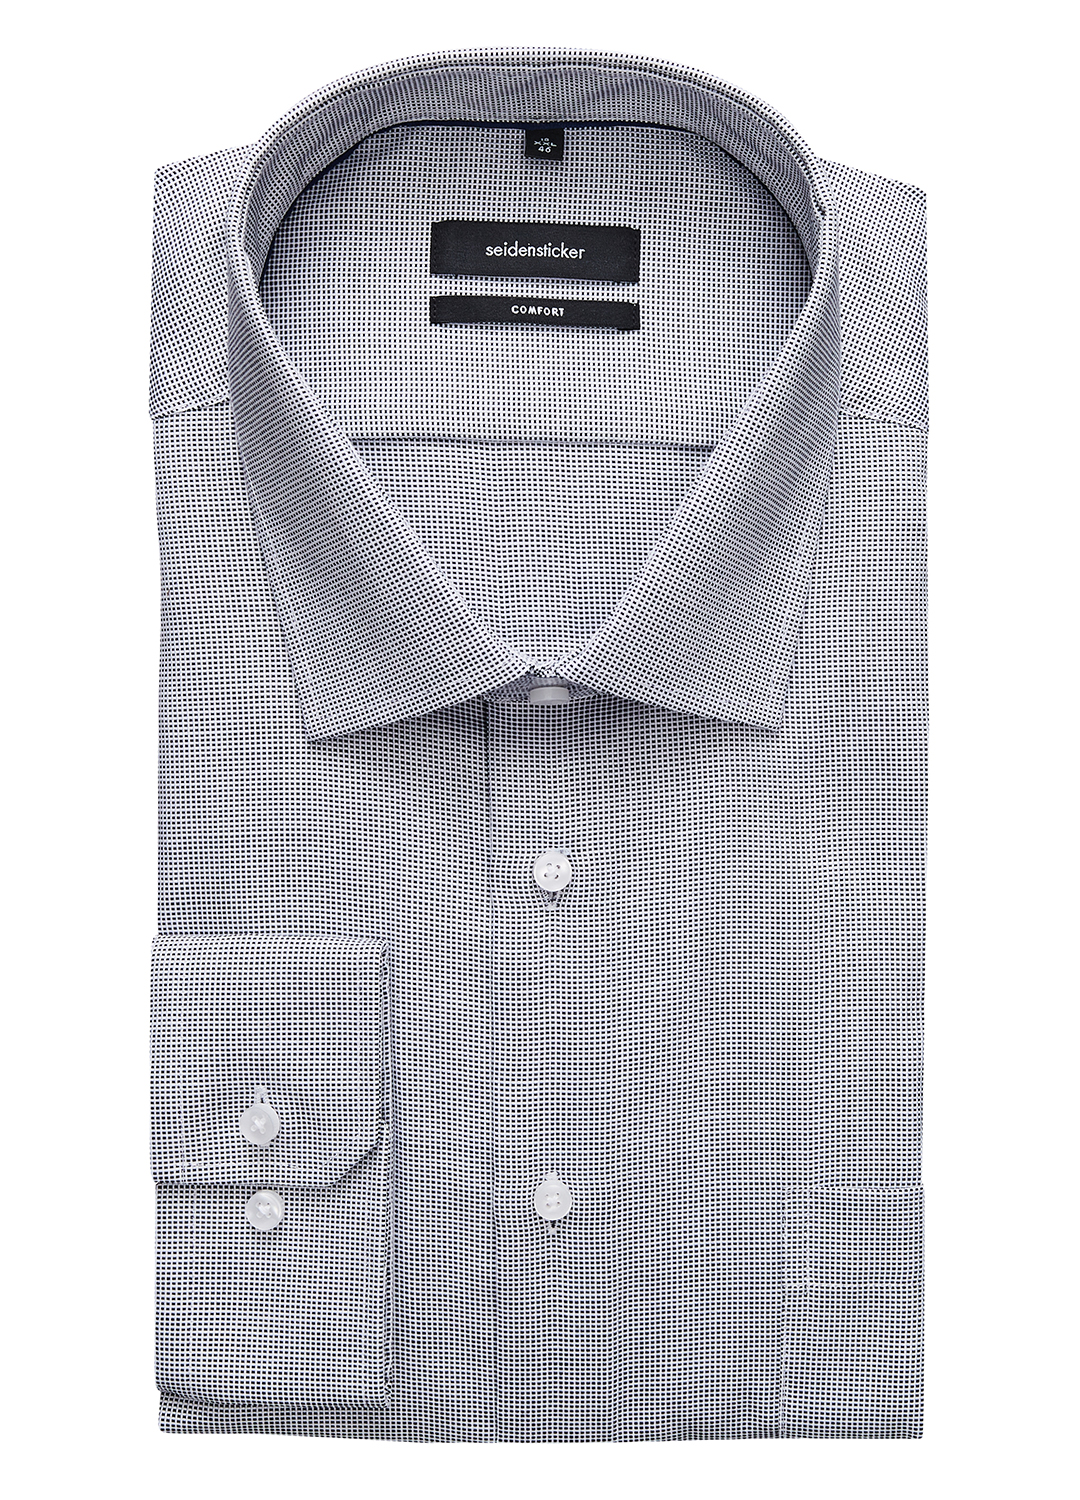 Navy Micro Neat Business Shirt - High and Mighty Menswear